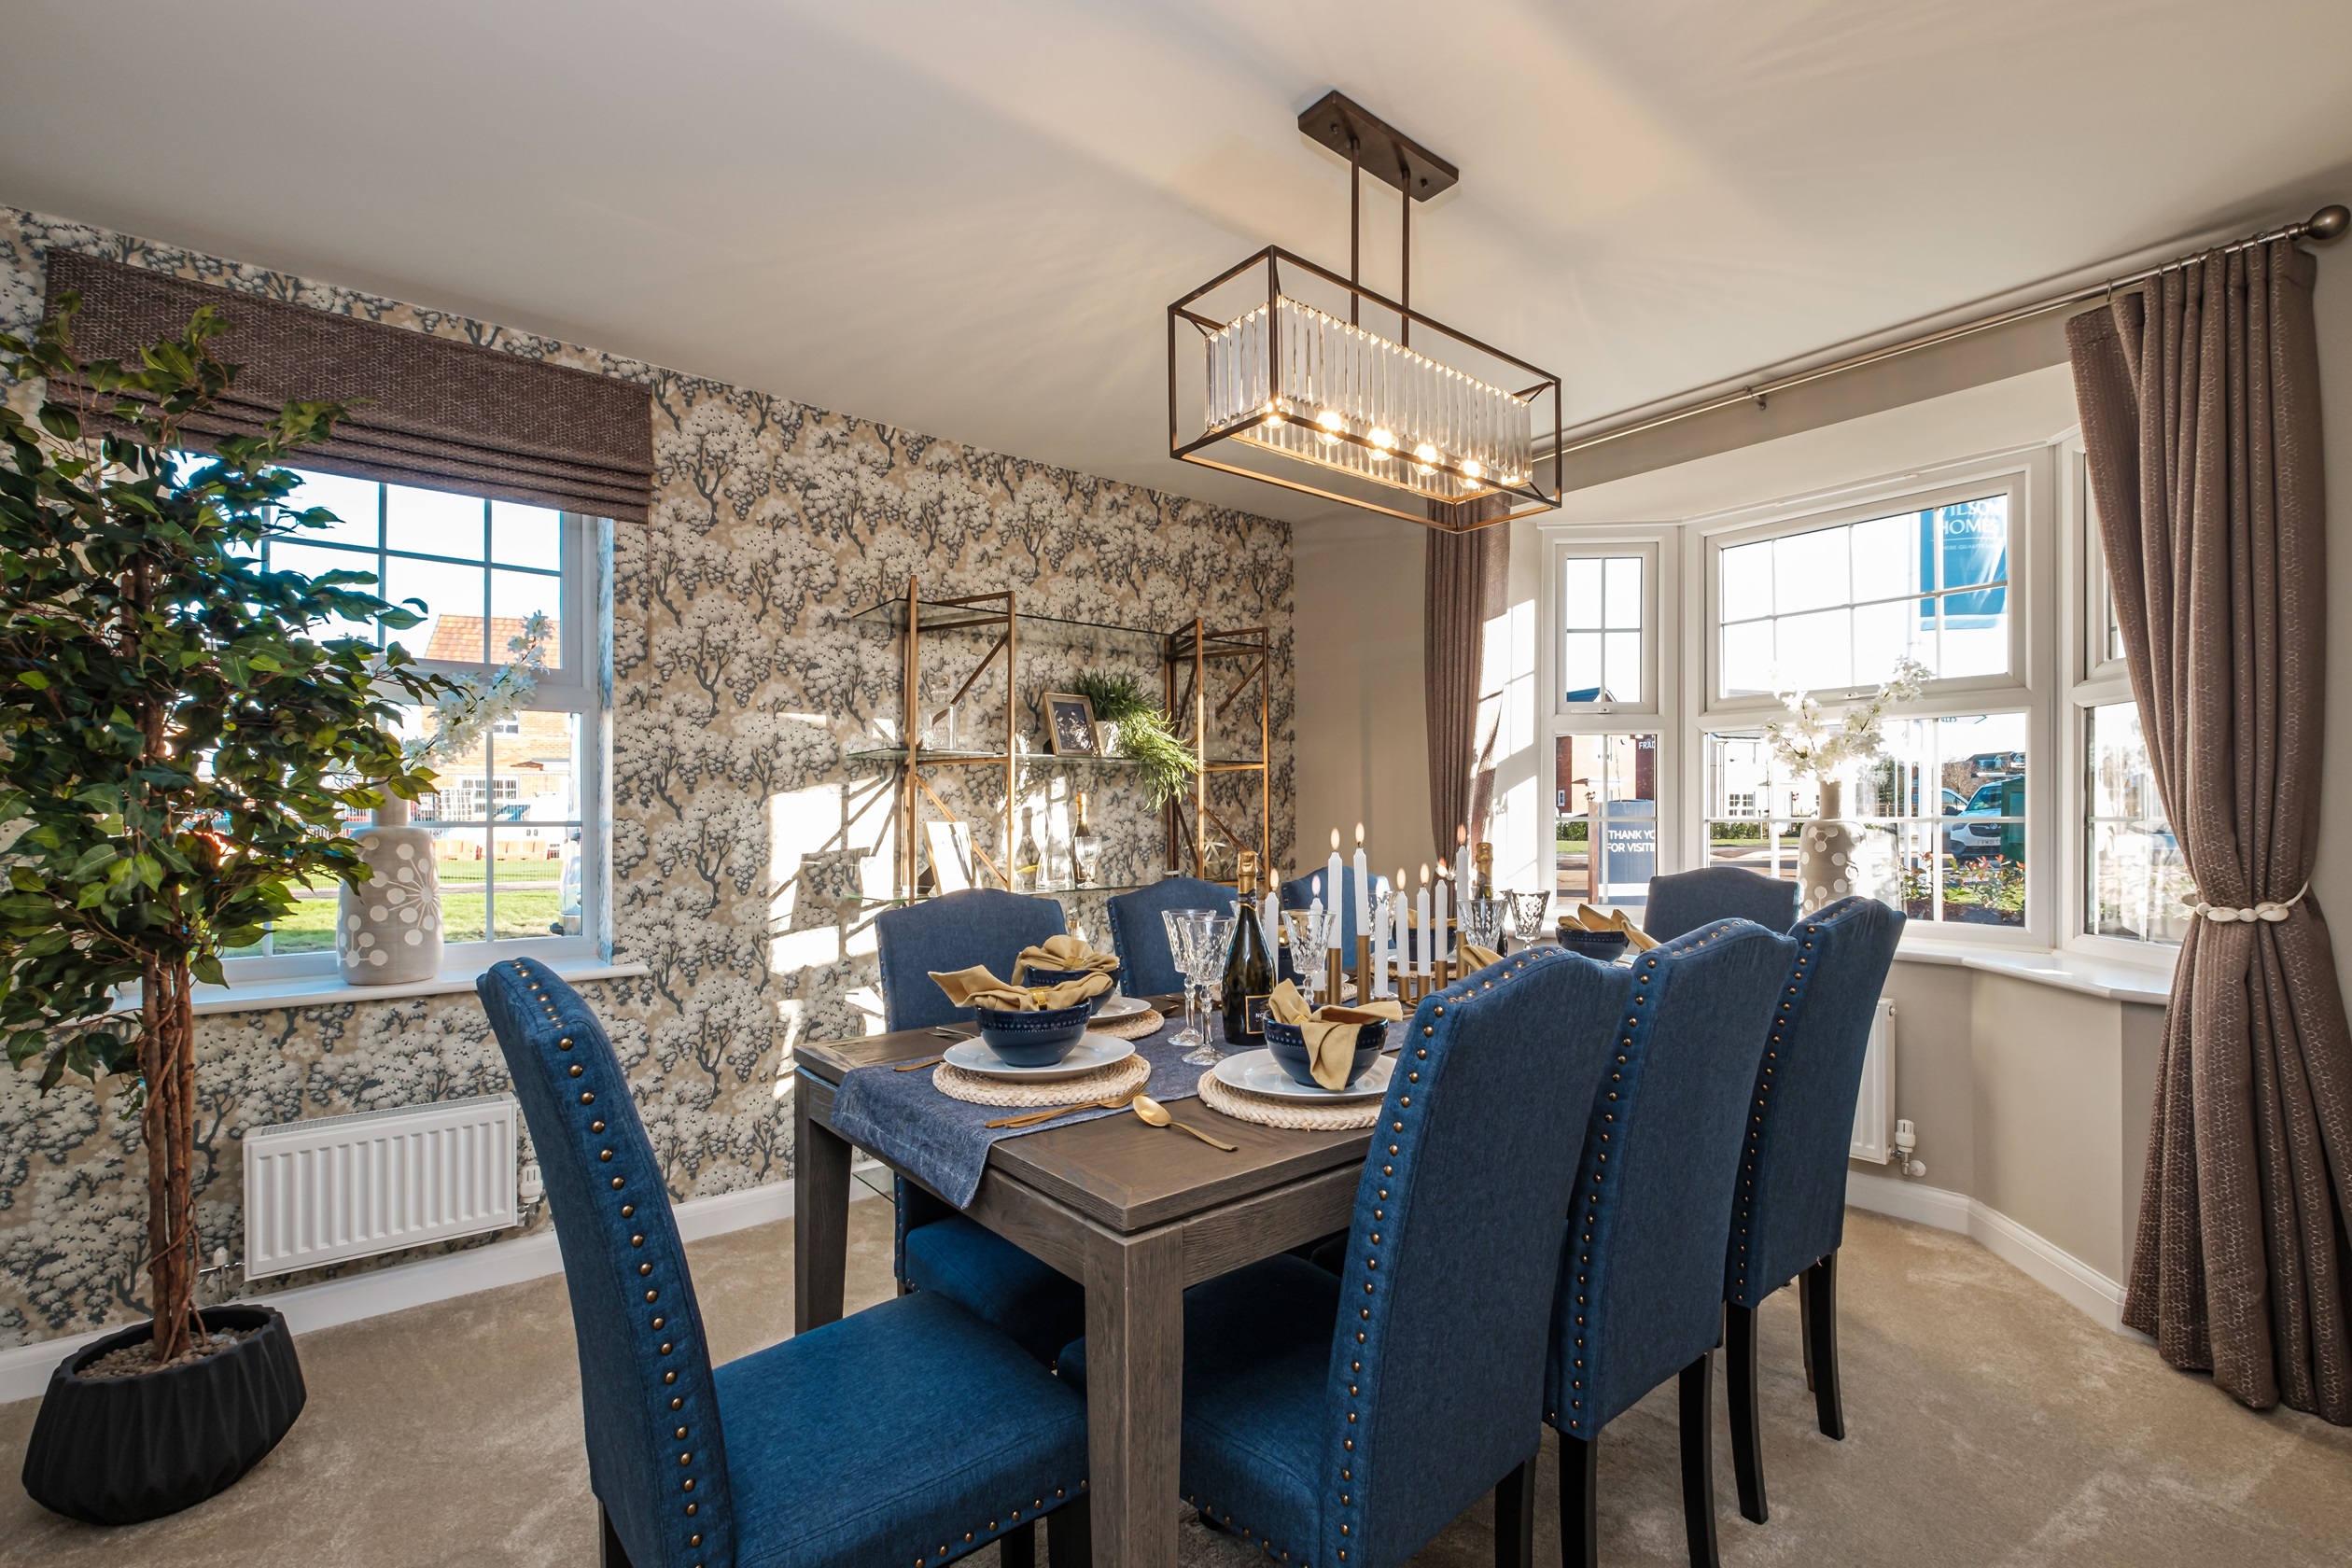 Property 3 of 10. Bay-Fronted Dining Room With Navy Decor